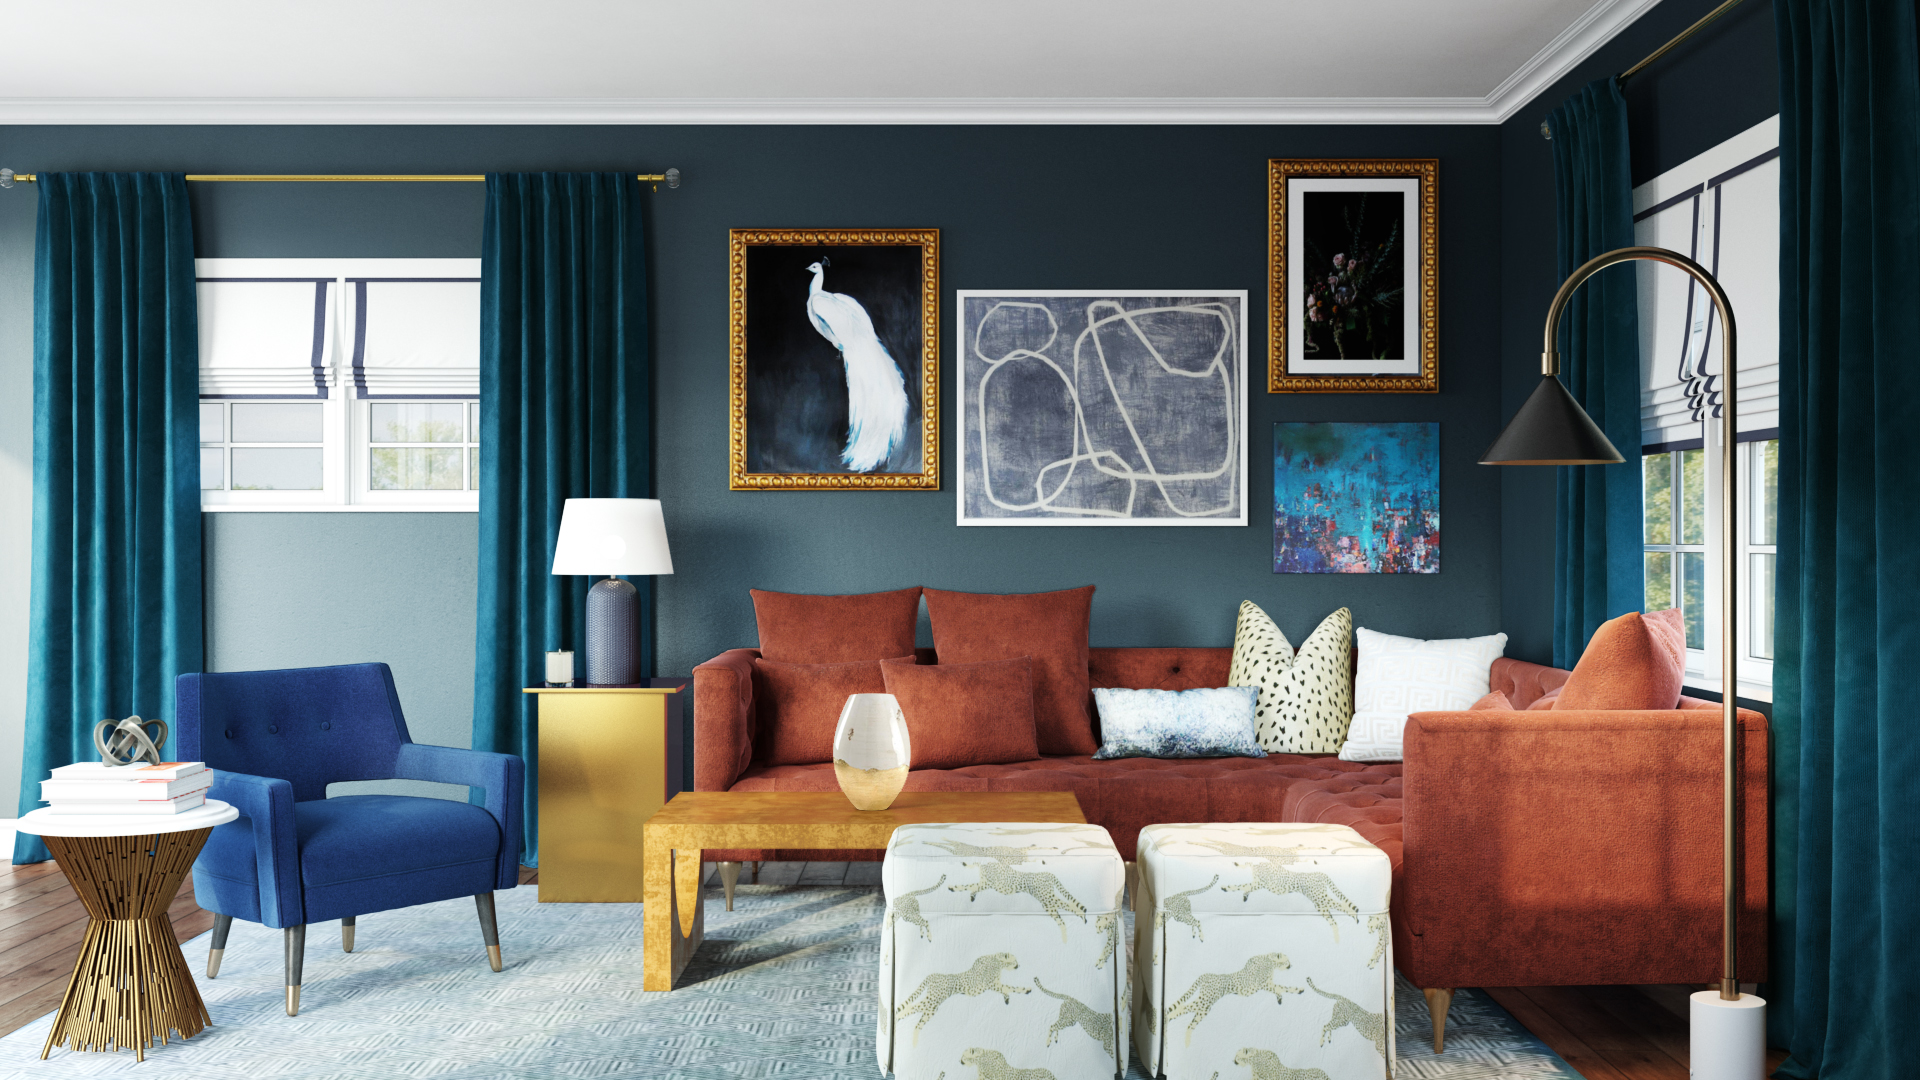 How Does Your Interior Design Reflect Your Personality? » Residence Style